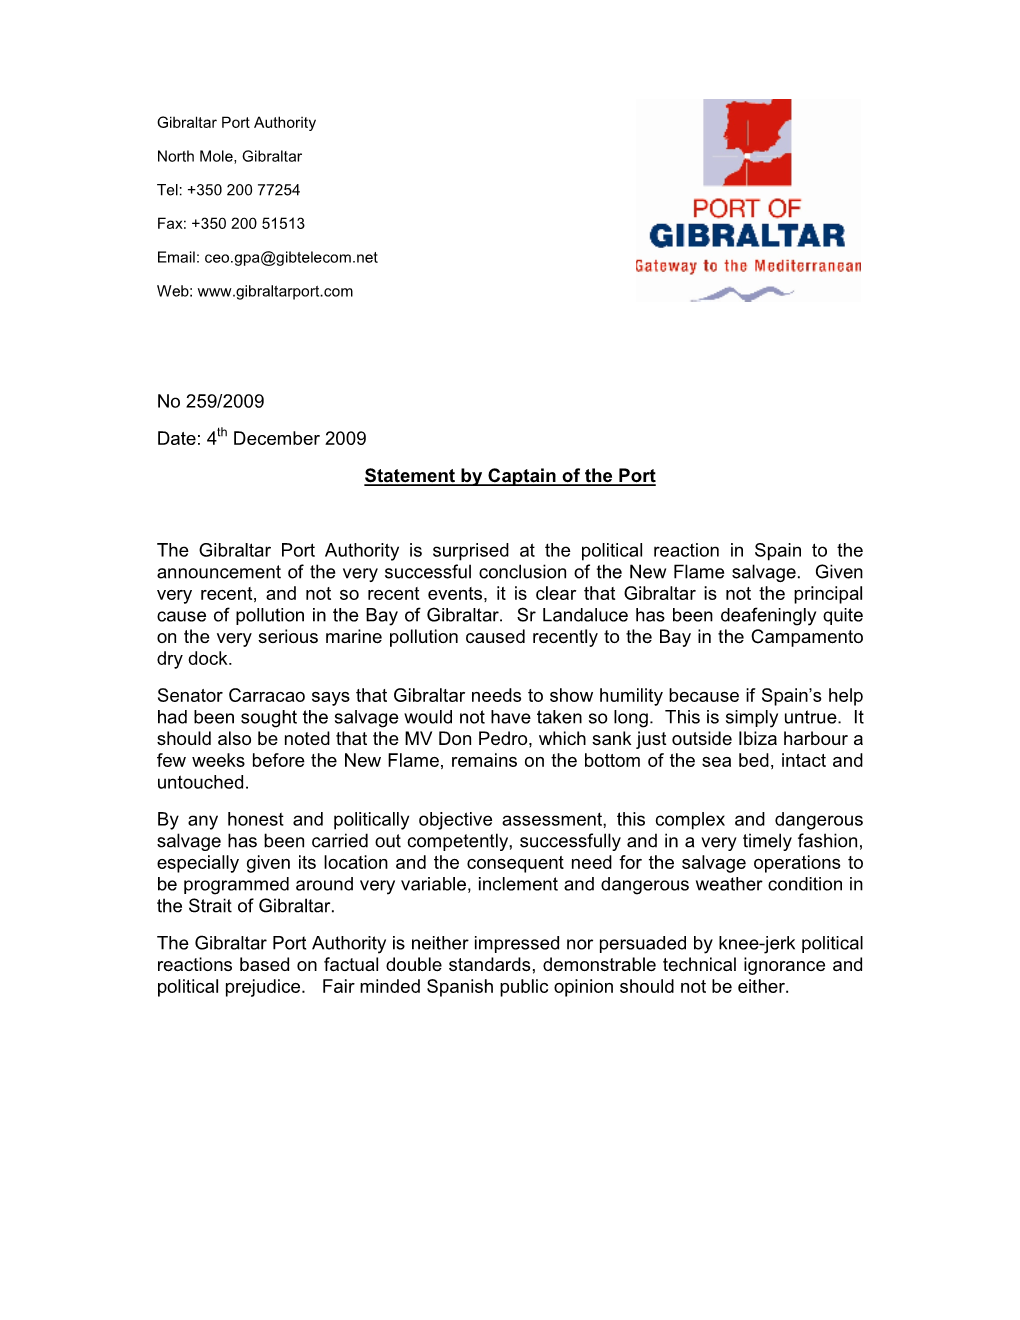 No 259/2009 Date: 4Th December 2009 Statement by Captain of the Port the Gibraltar Port Authority Is Surprised at the Political